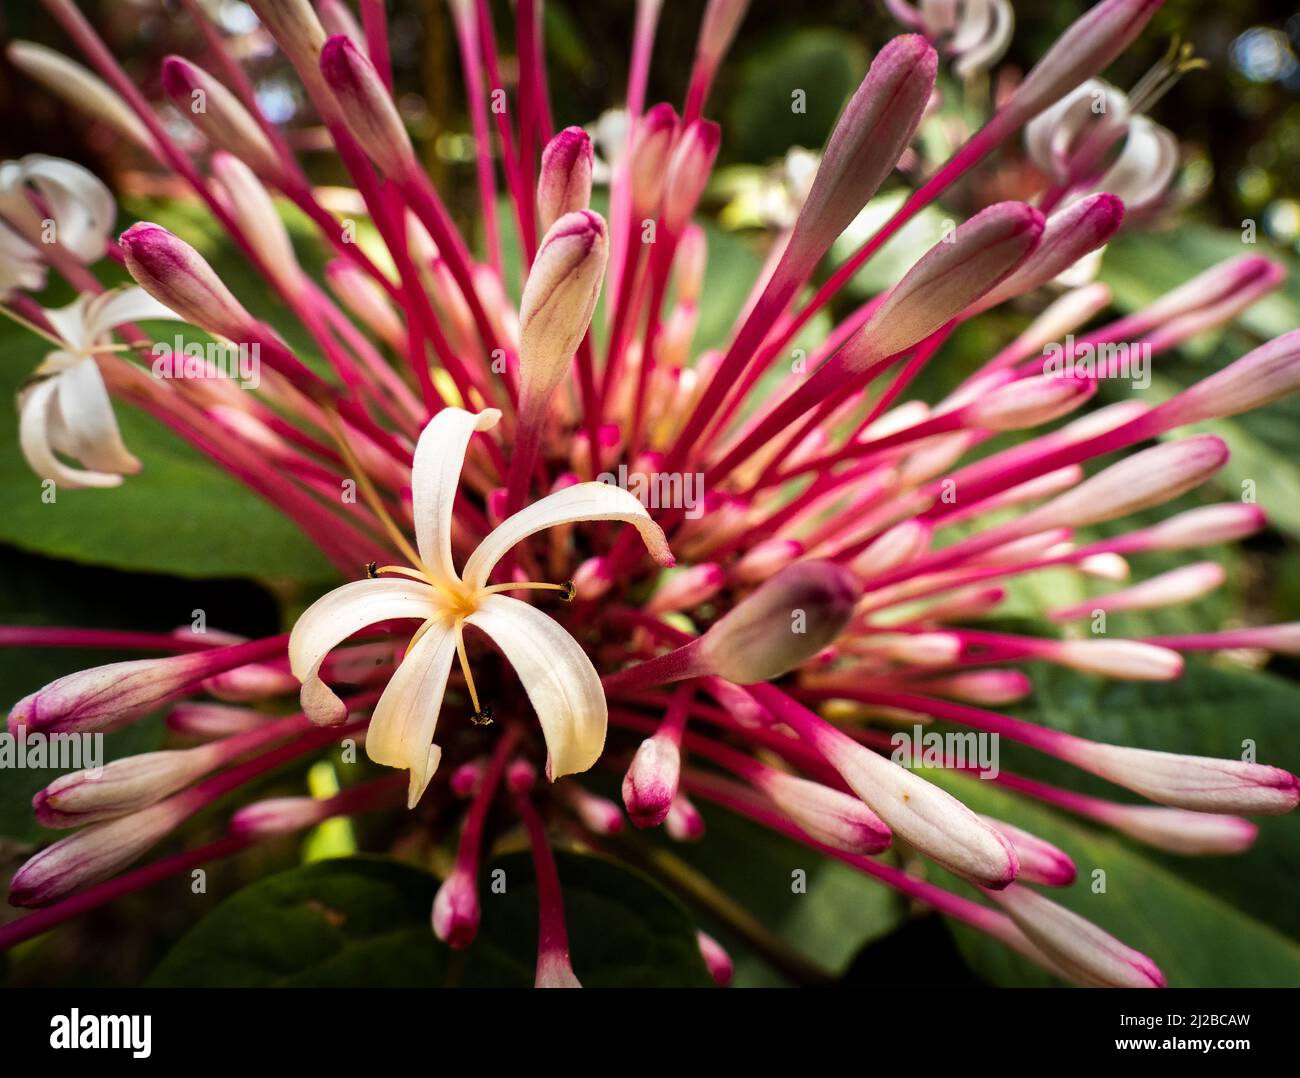 Closeup of white flowers of Starburst or shooting star clerodendrum (Clerodendrum quadriloculare) Stock Photo